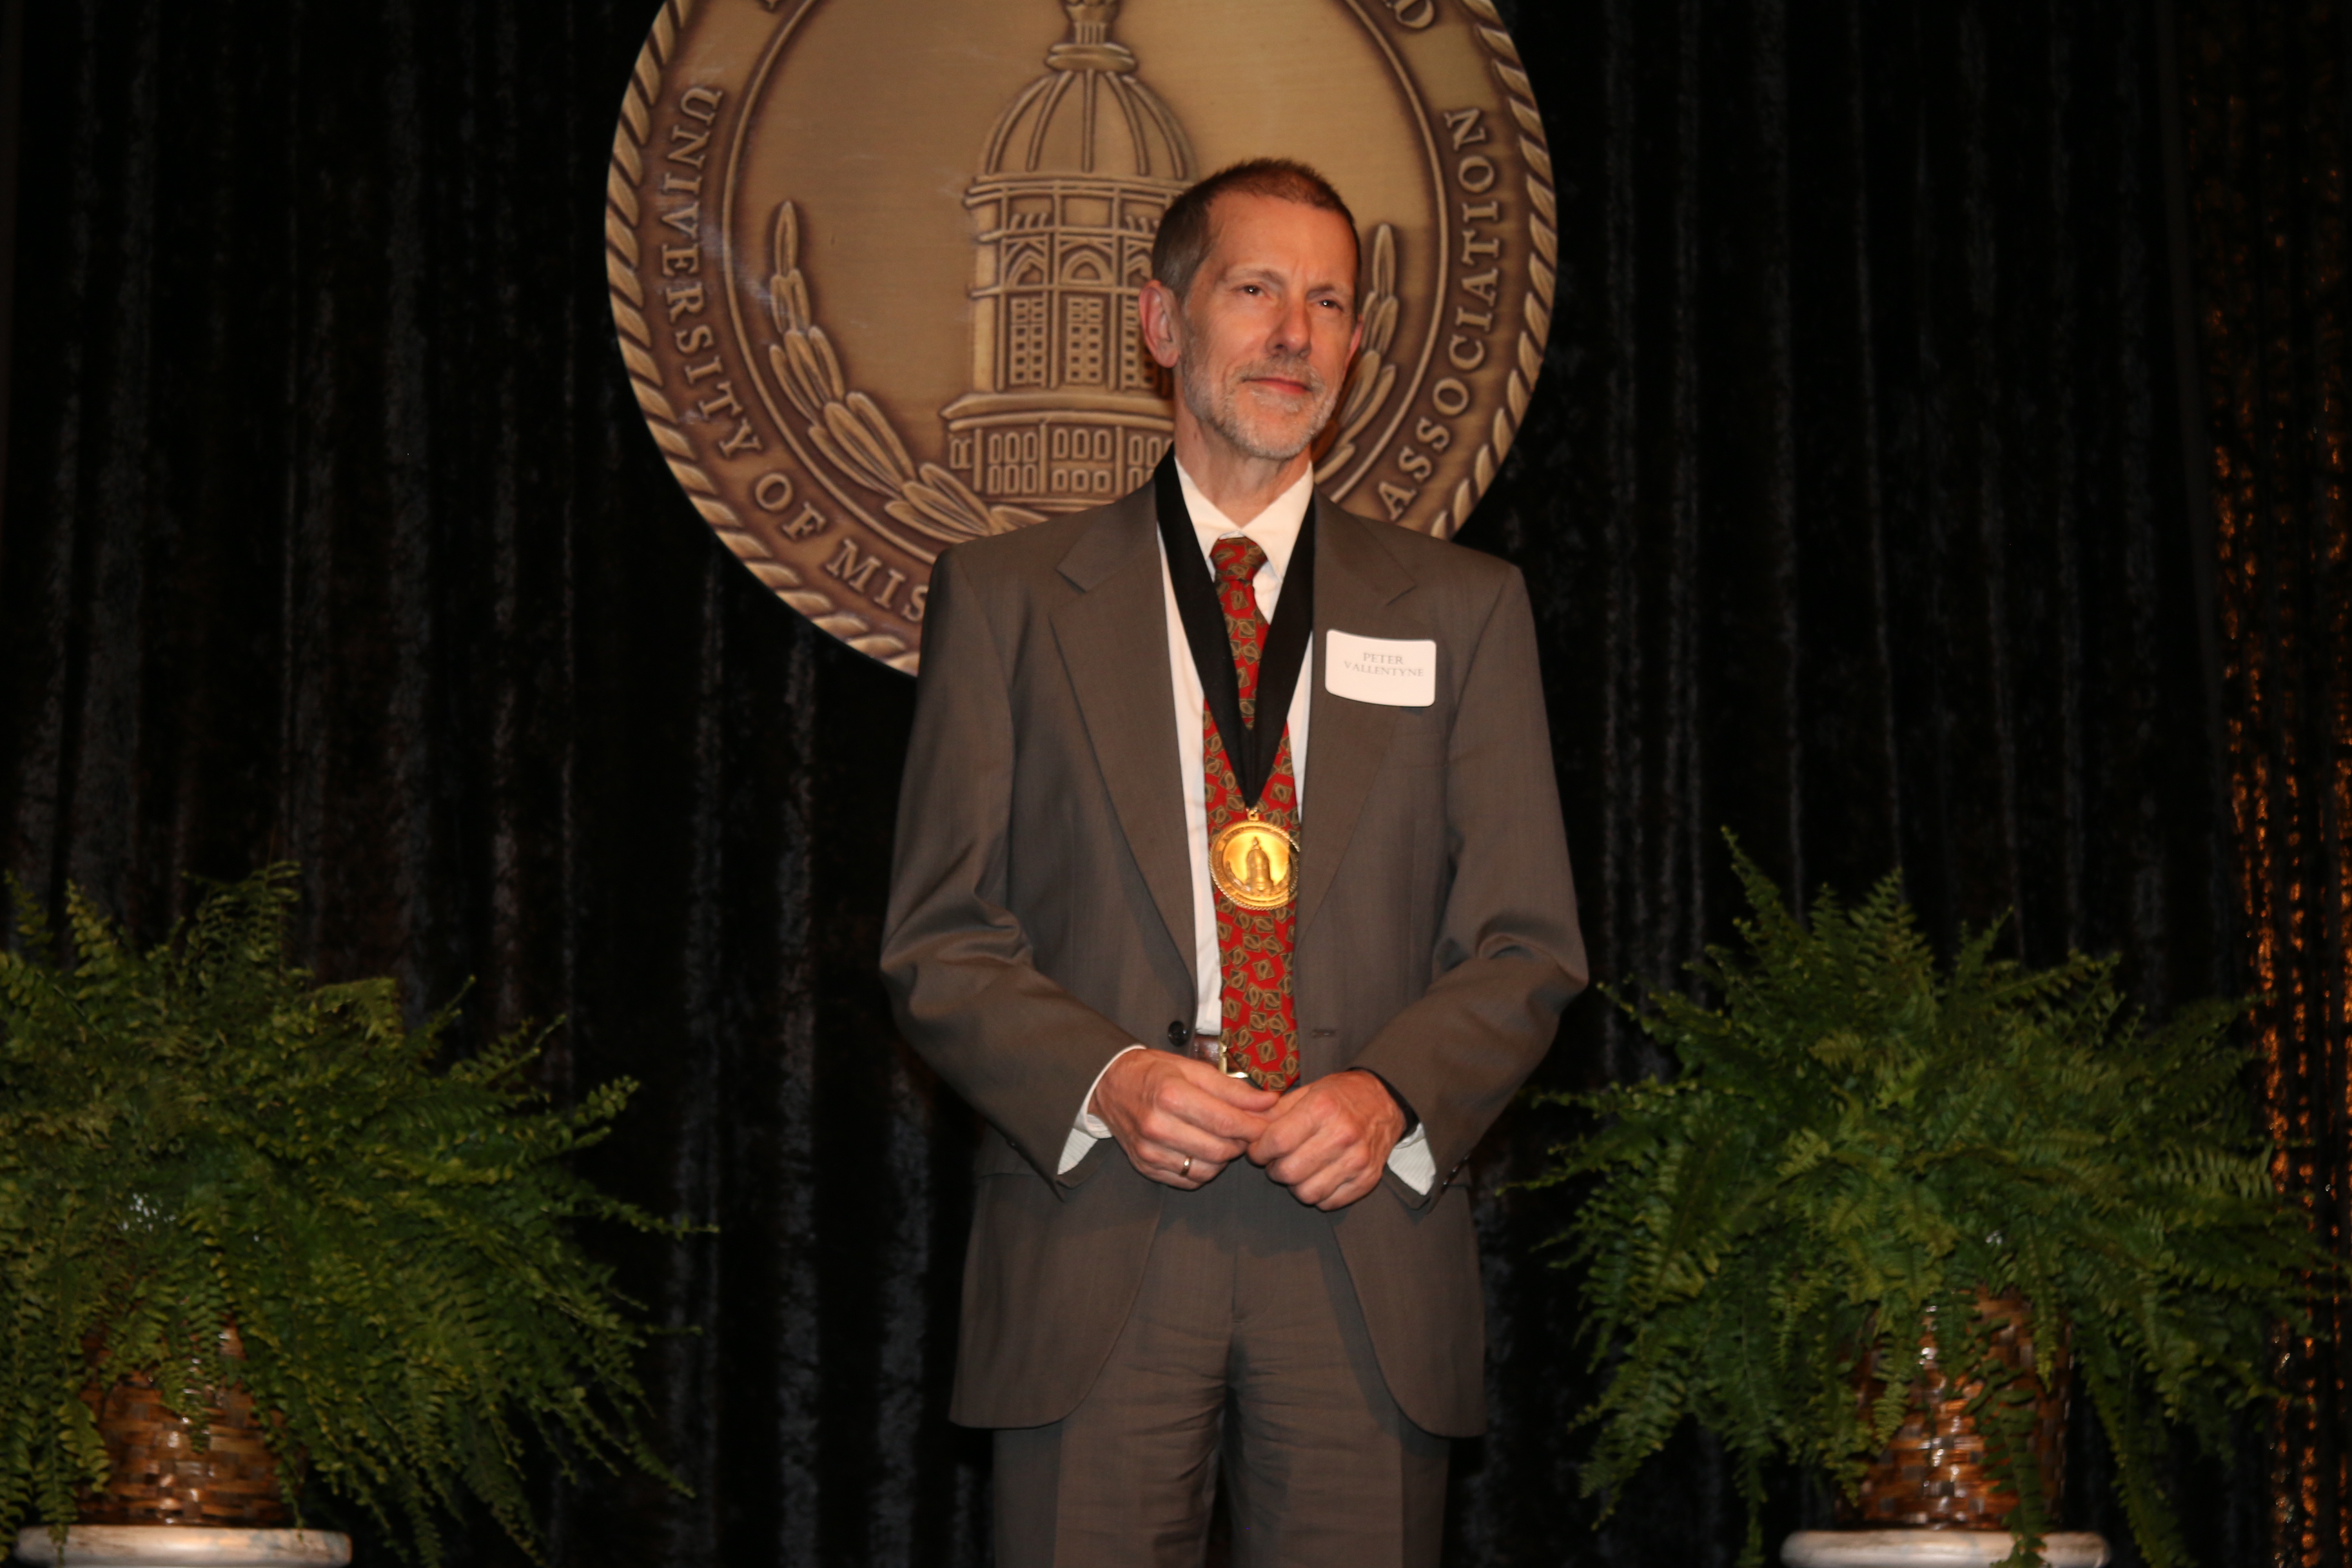 Dr. Peter Vallentyne at the Faculty-Alumni Awards